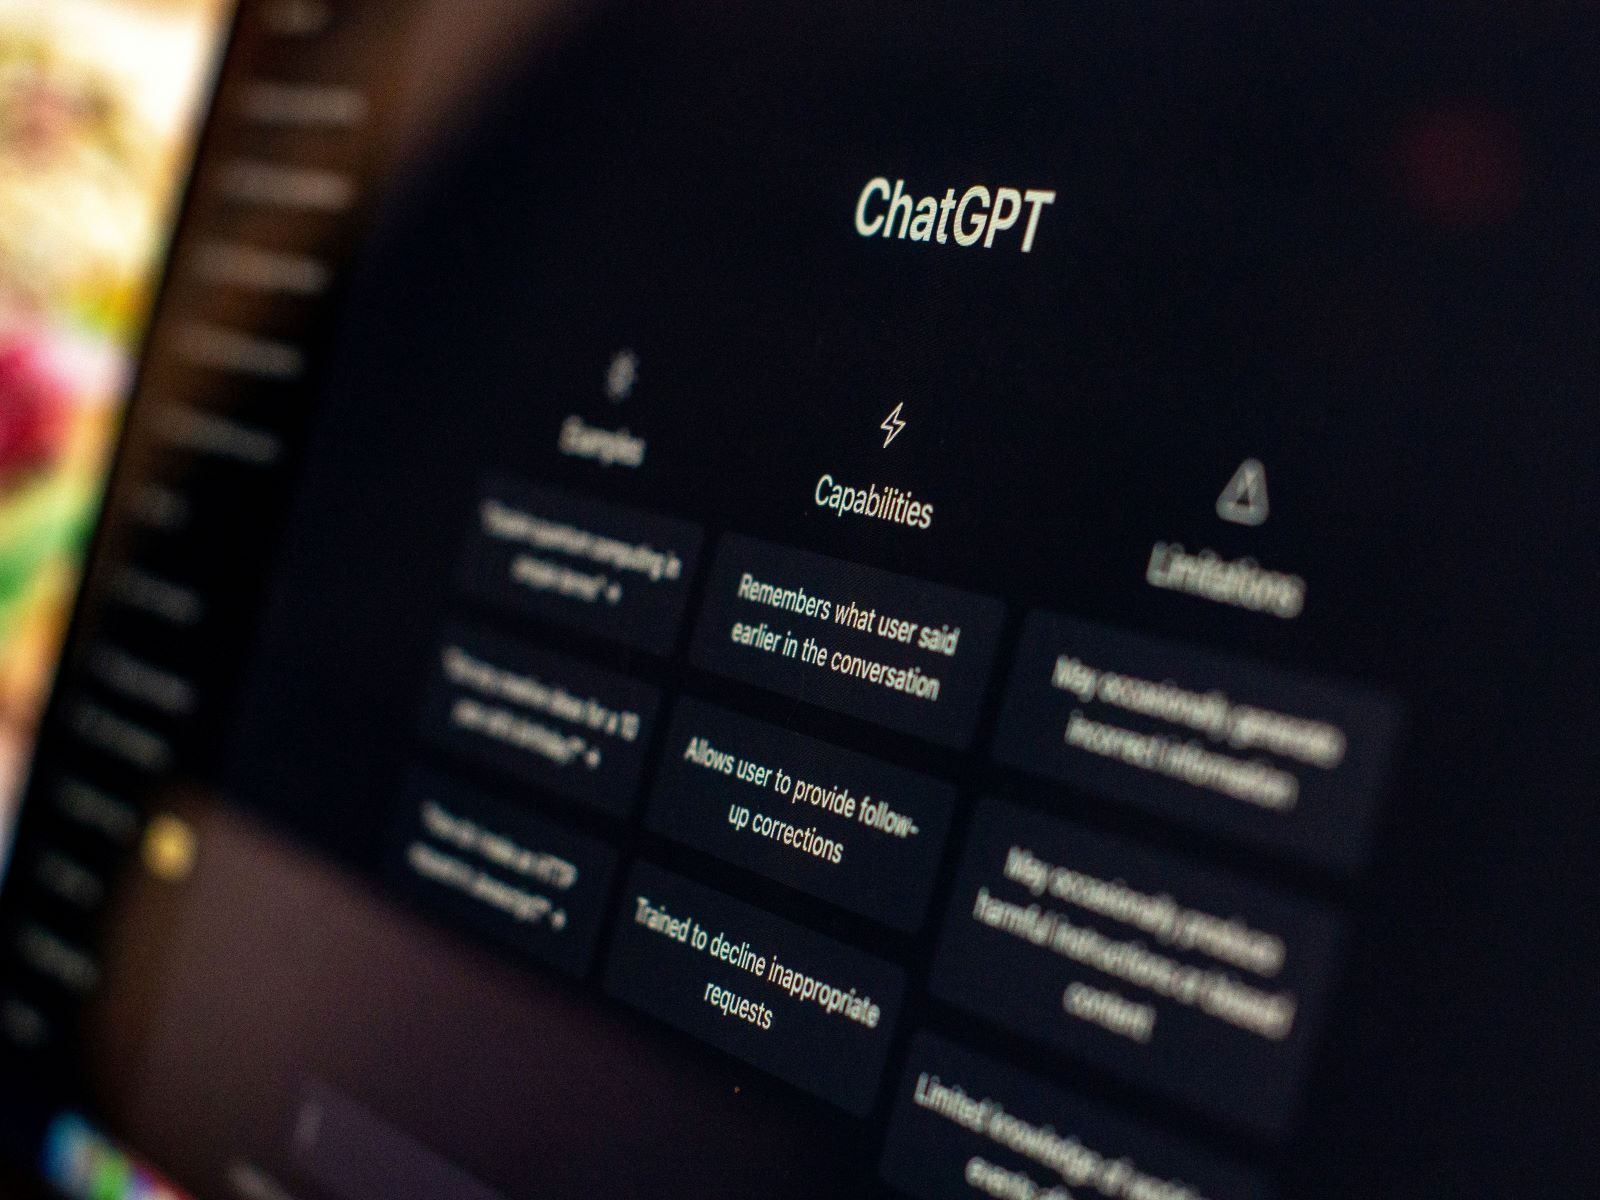 An image of the ChatGPT interface.